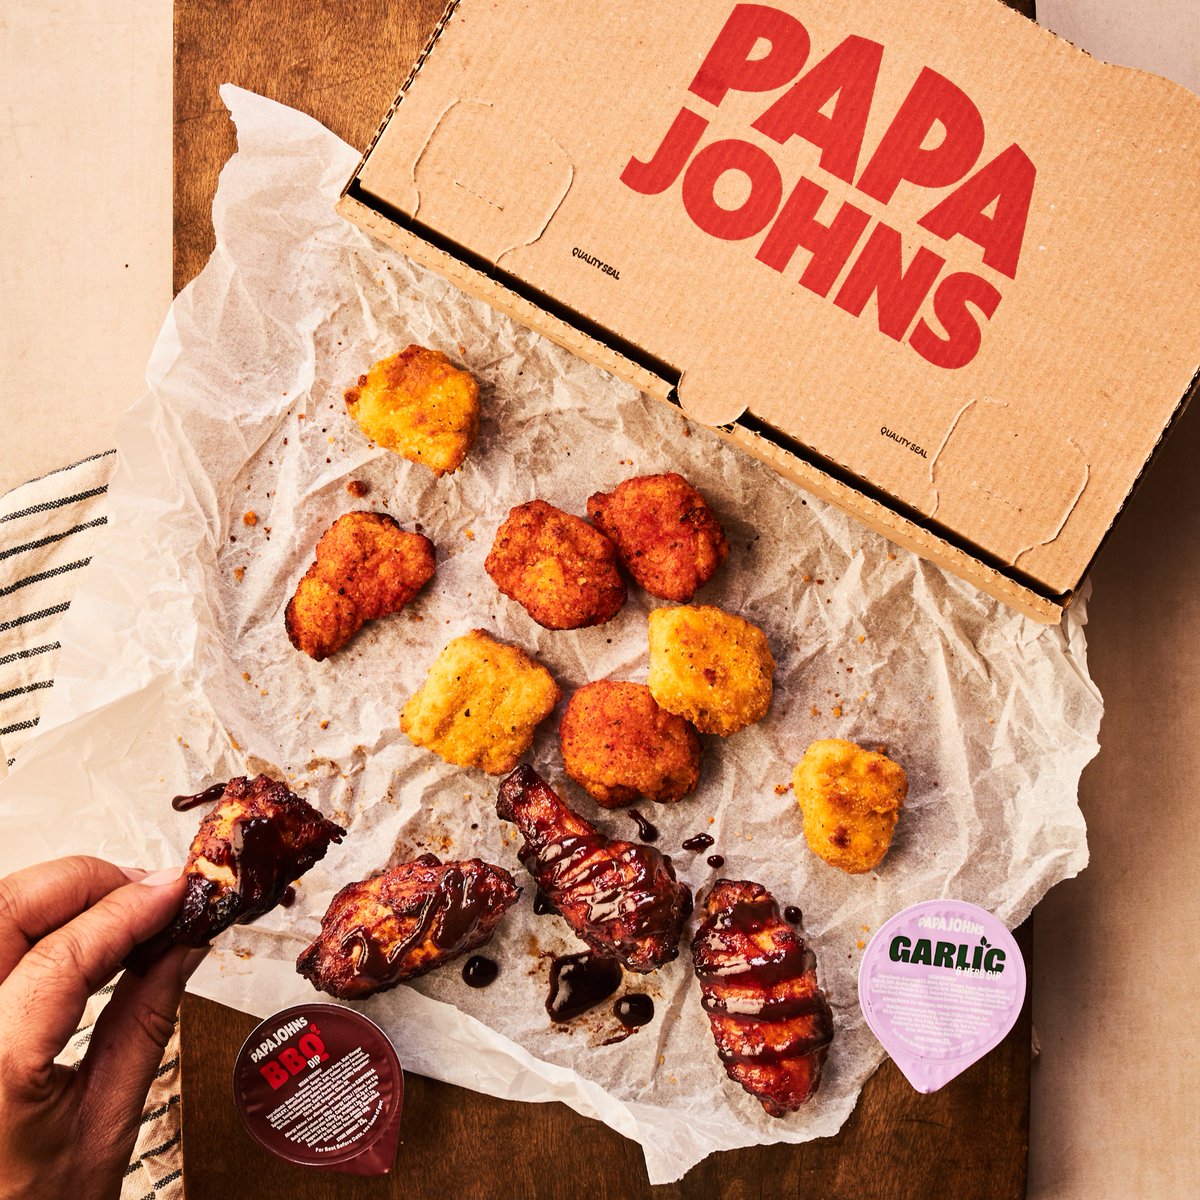 Sometimes, your pizza just needs its wingman. 🍕🍗 #papajohnsuk